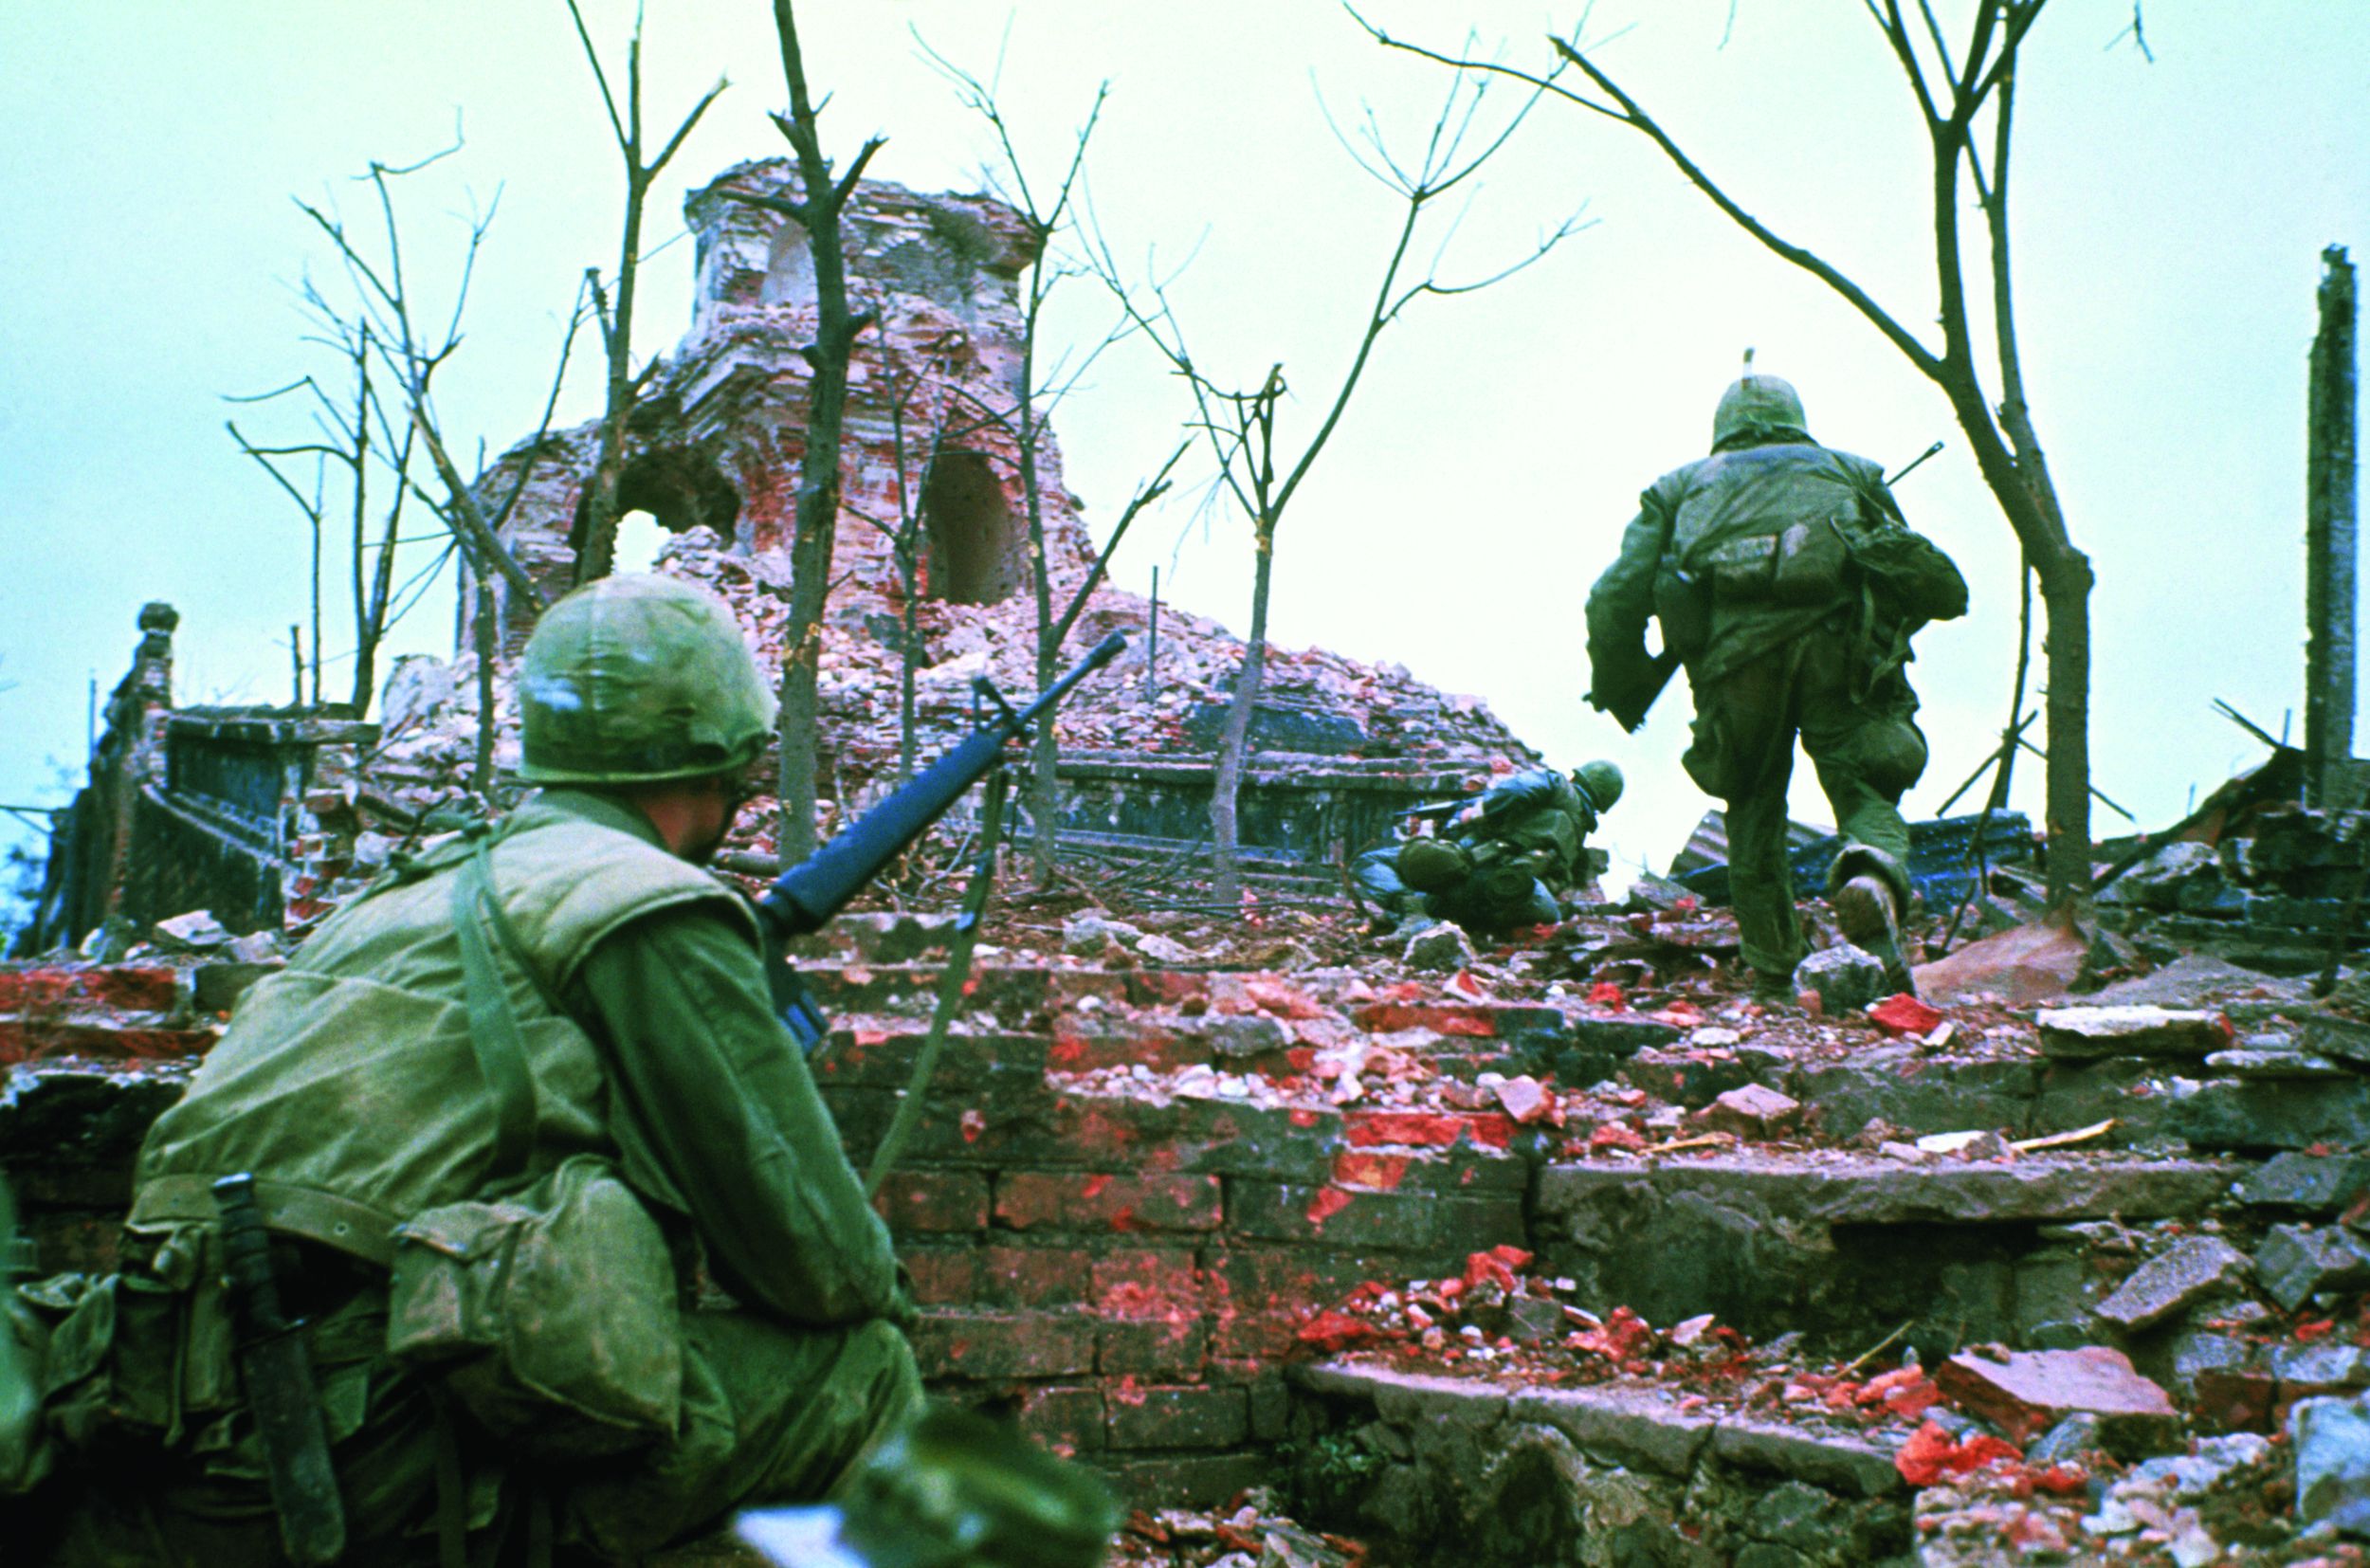 American Marines advance cautiously up the outer walls of the Citadel at Hue on February 13, 1968, following the surprise attack by North Vietnamese and Vietcong forces.